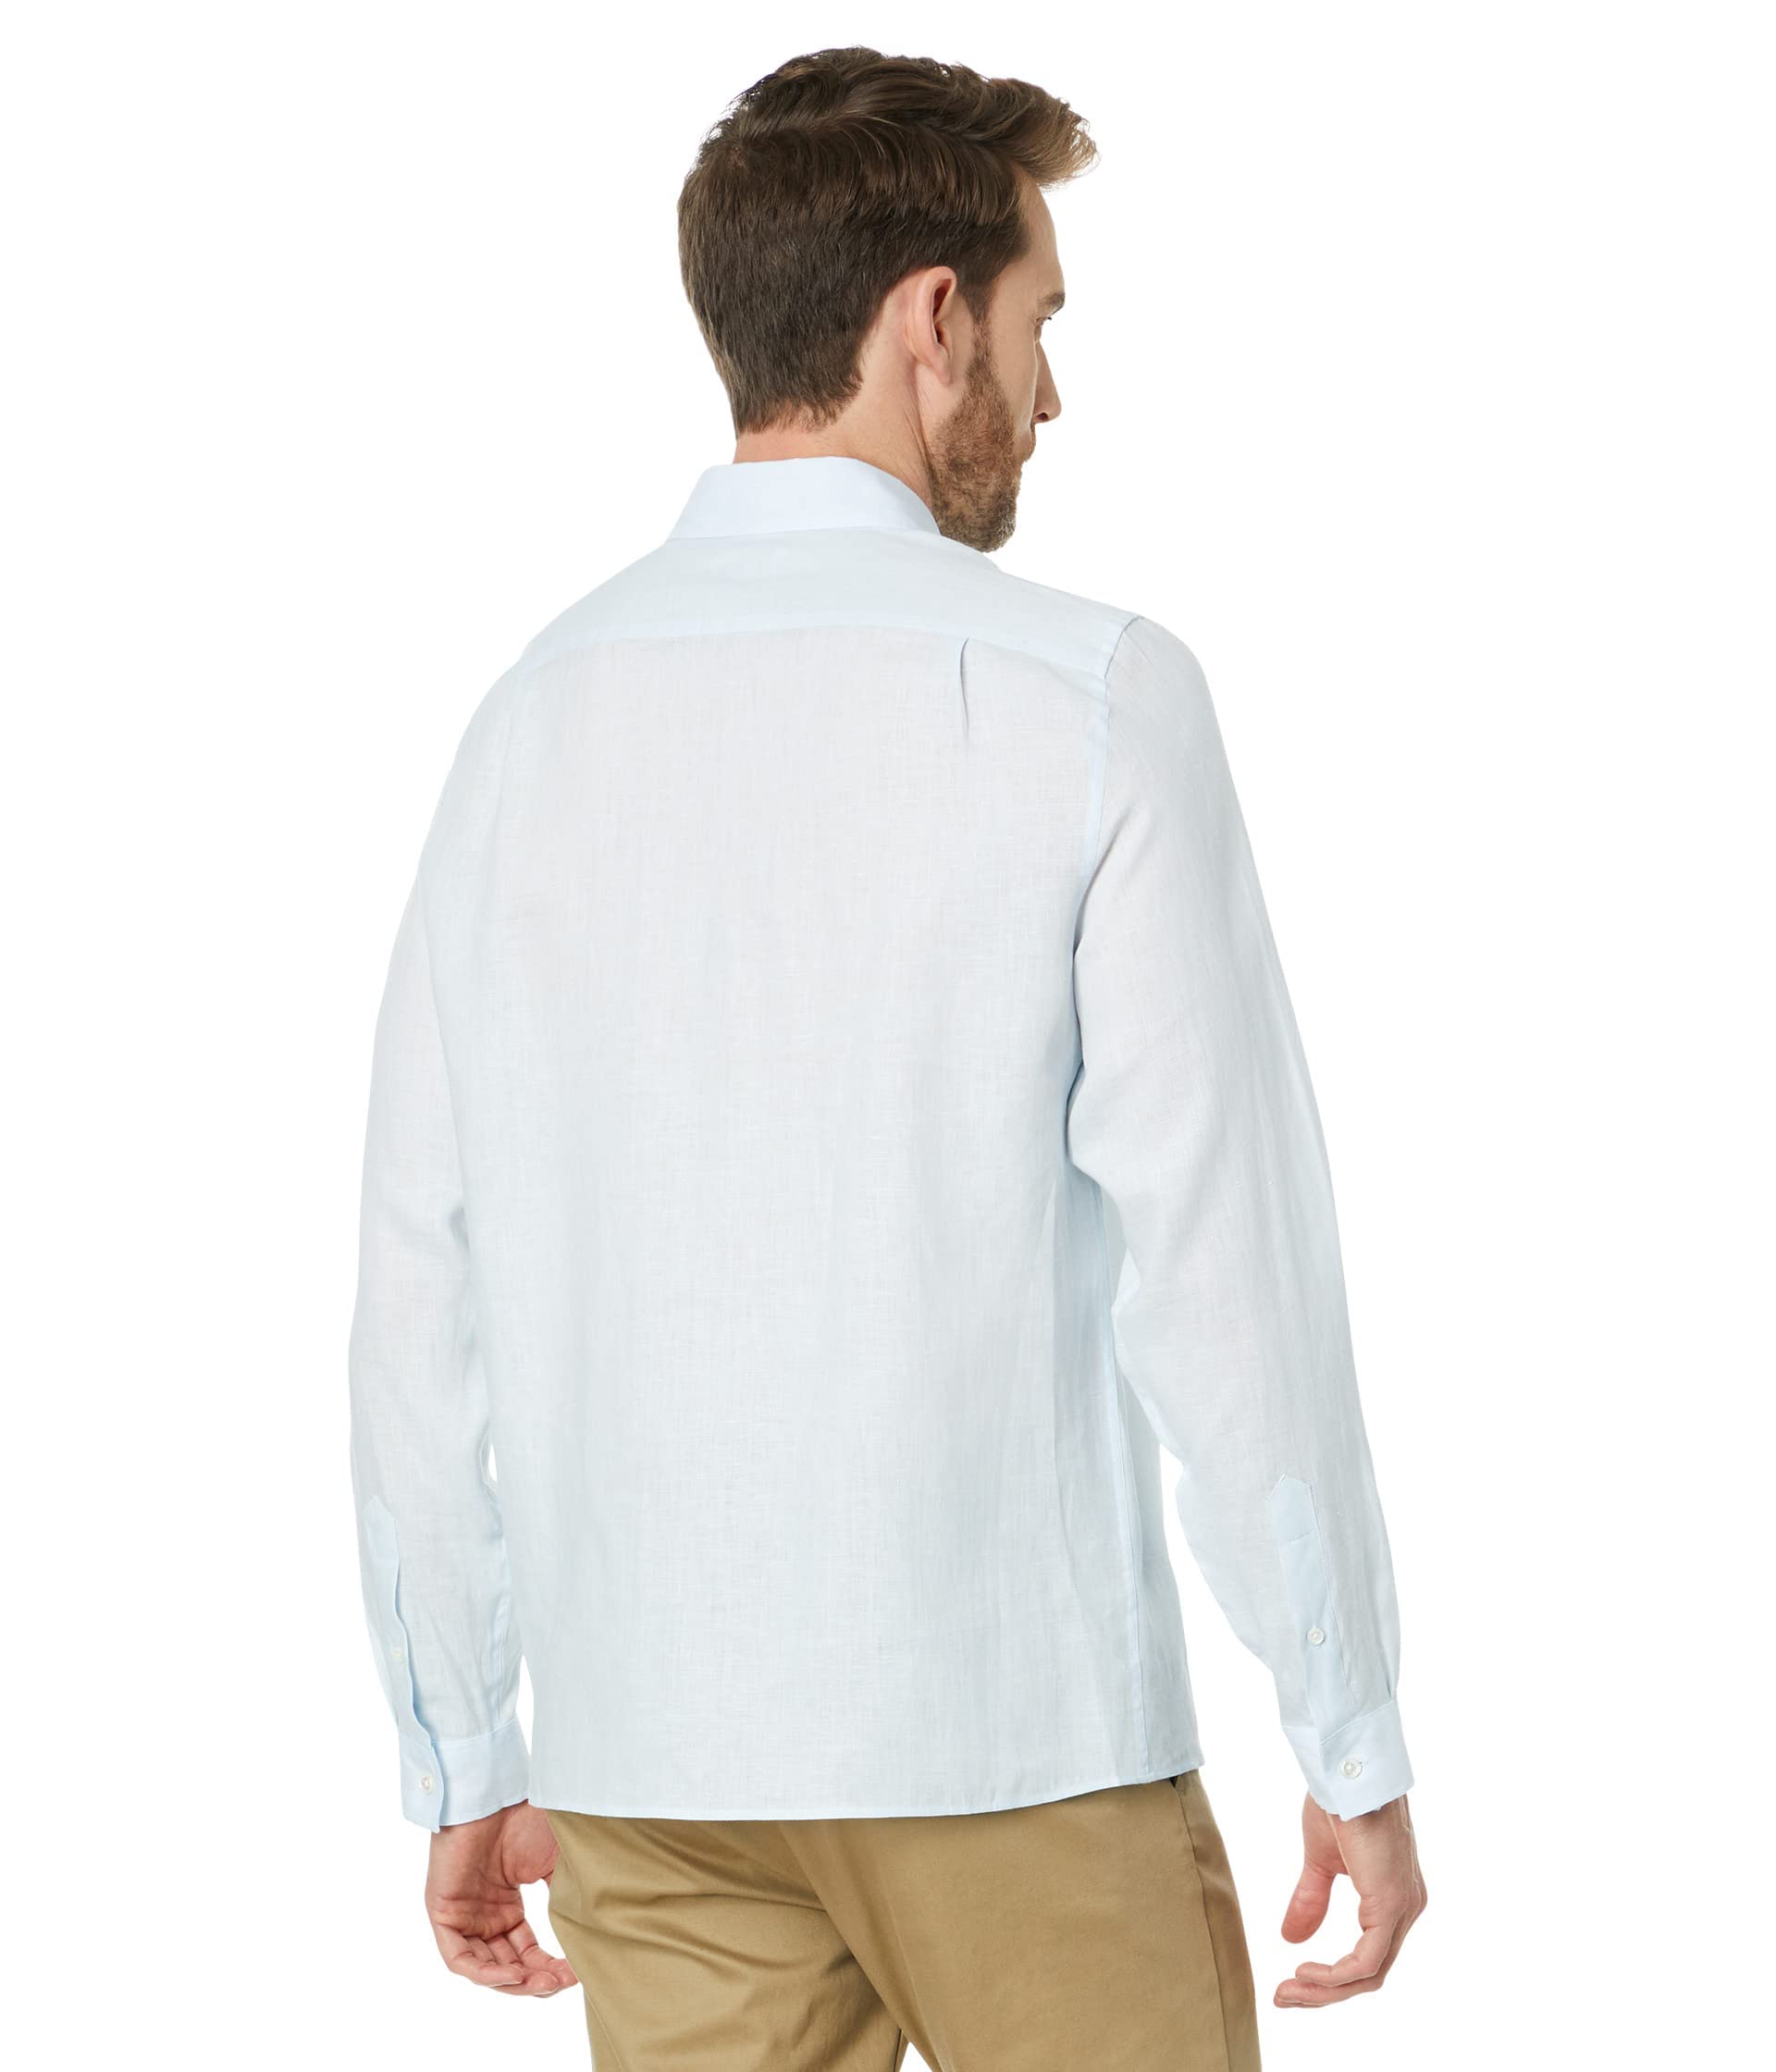 Lacoste Contemporary Collection's Men's Long Sleeve Regular Fit Linen Button Down with Front Pocket